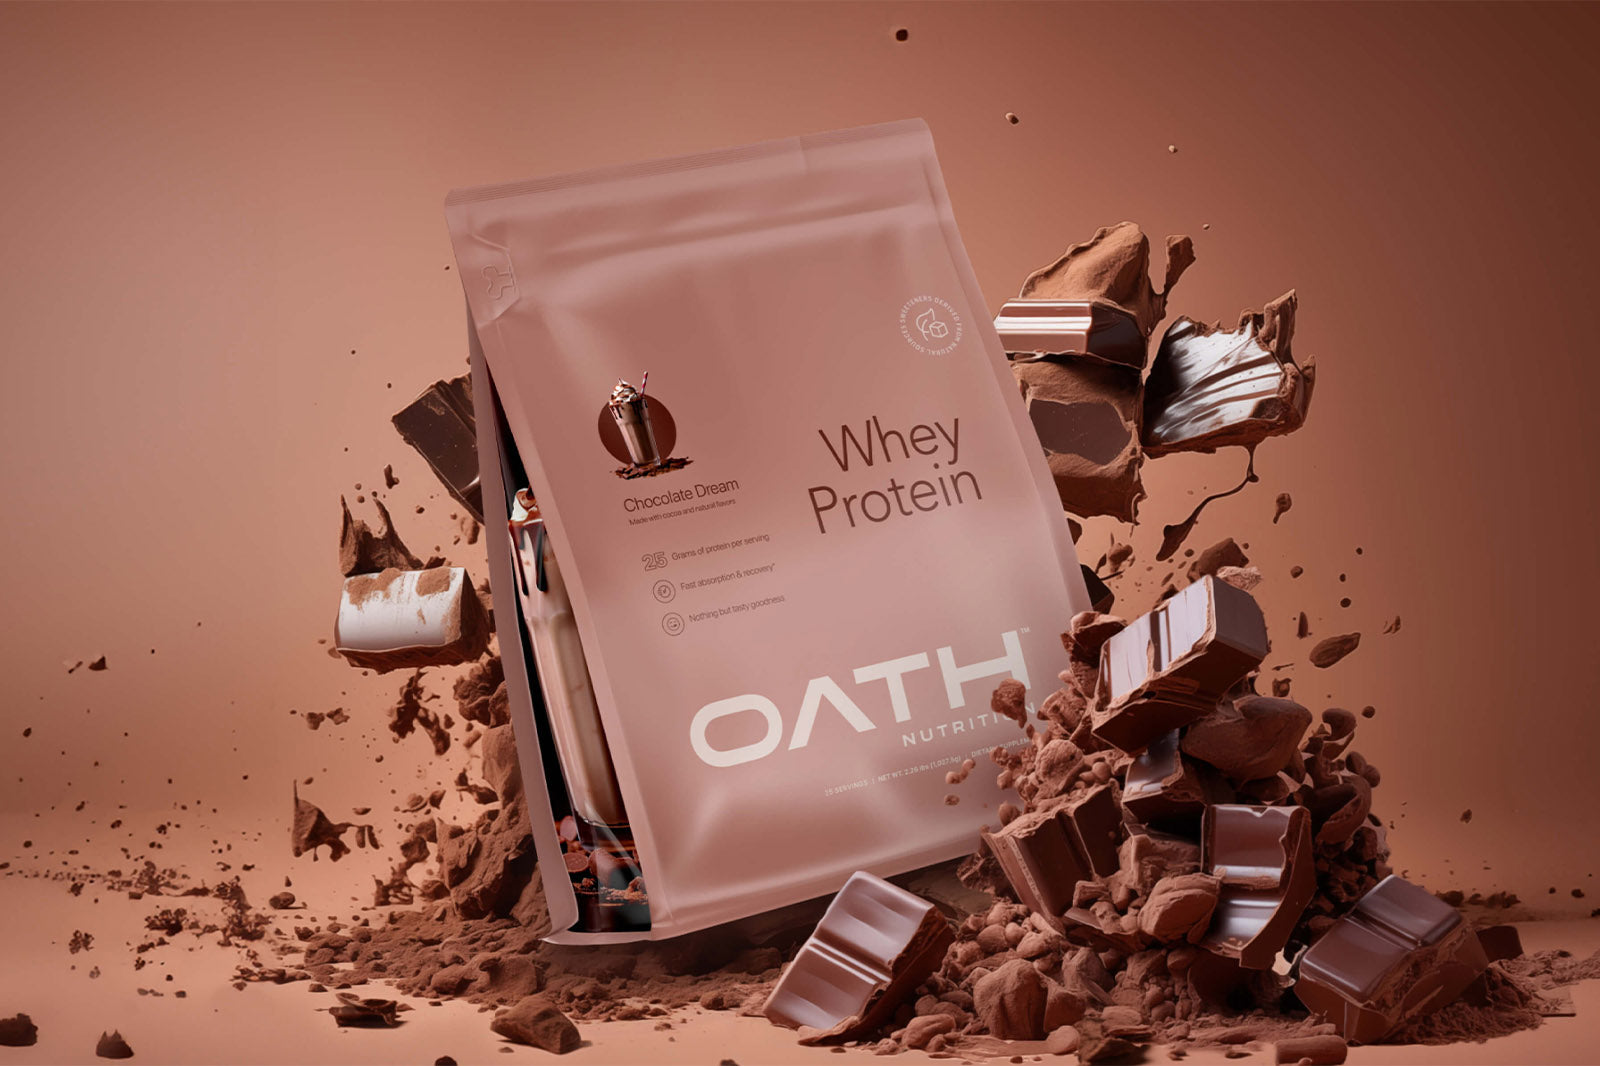 Oath Naturally Sweetened Protein - Chocolate Dream with delicious chocolate pieces bursting all around the bag.